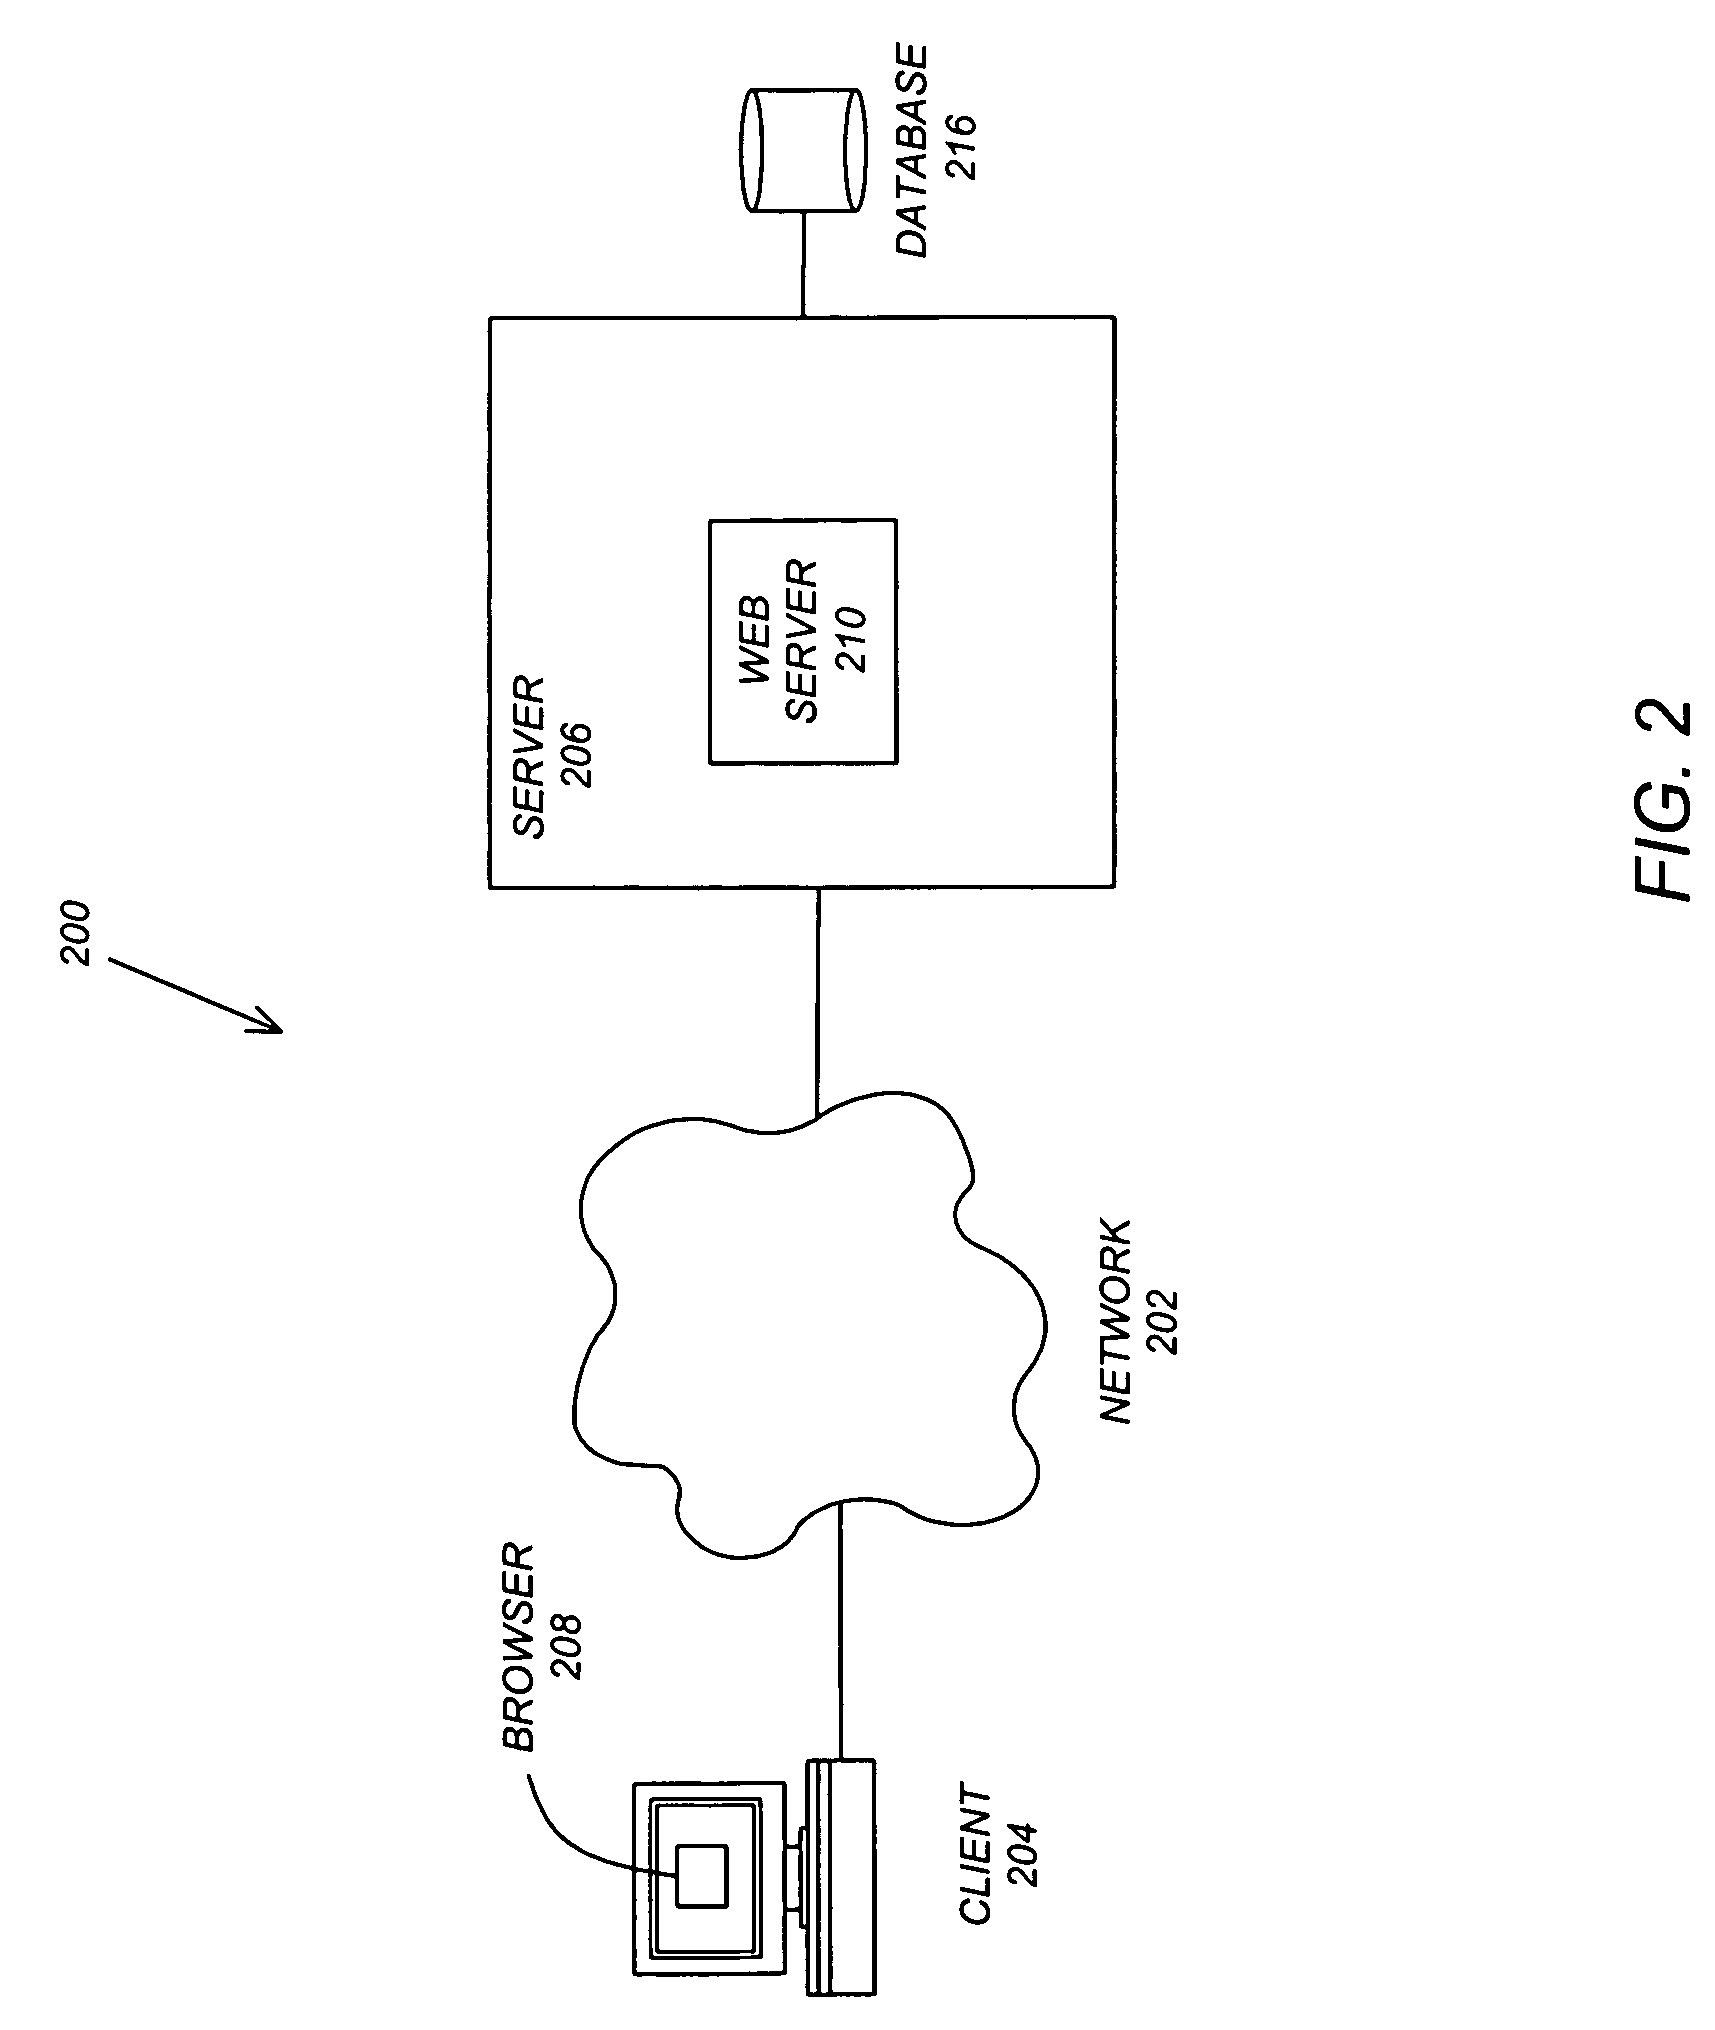 Method and apparatus for providing access to drawing information